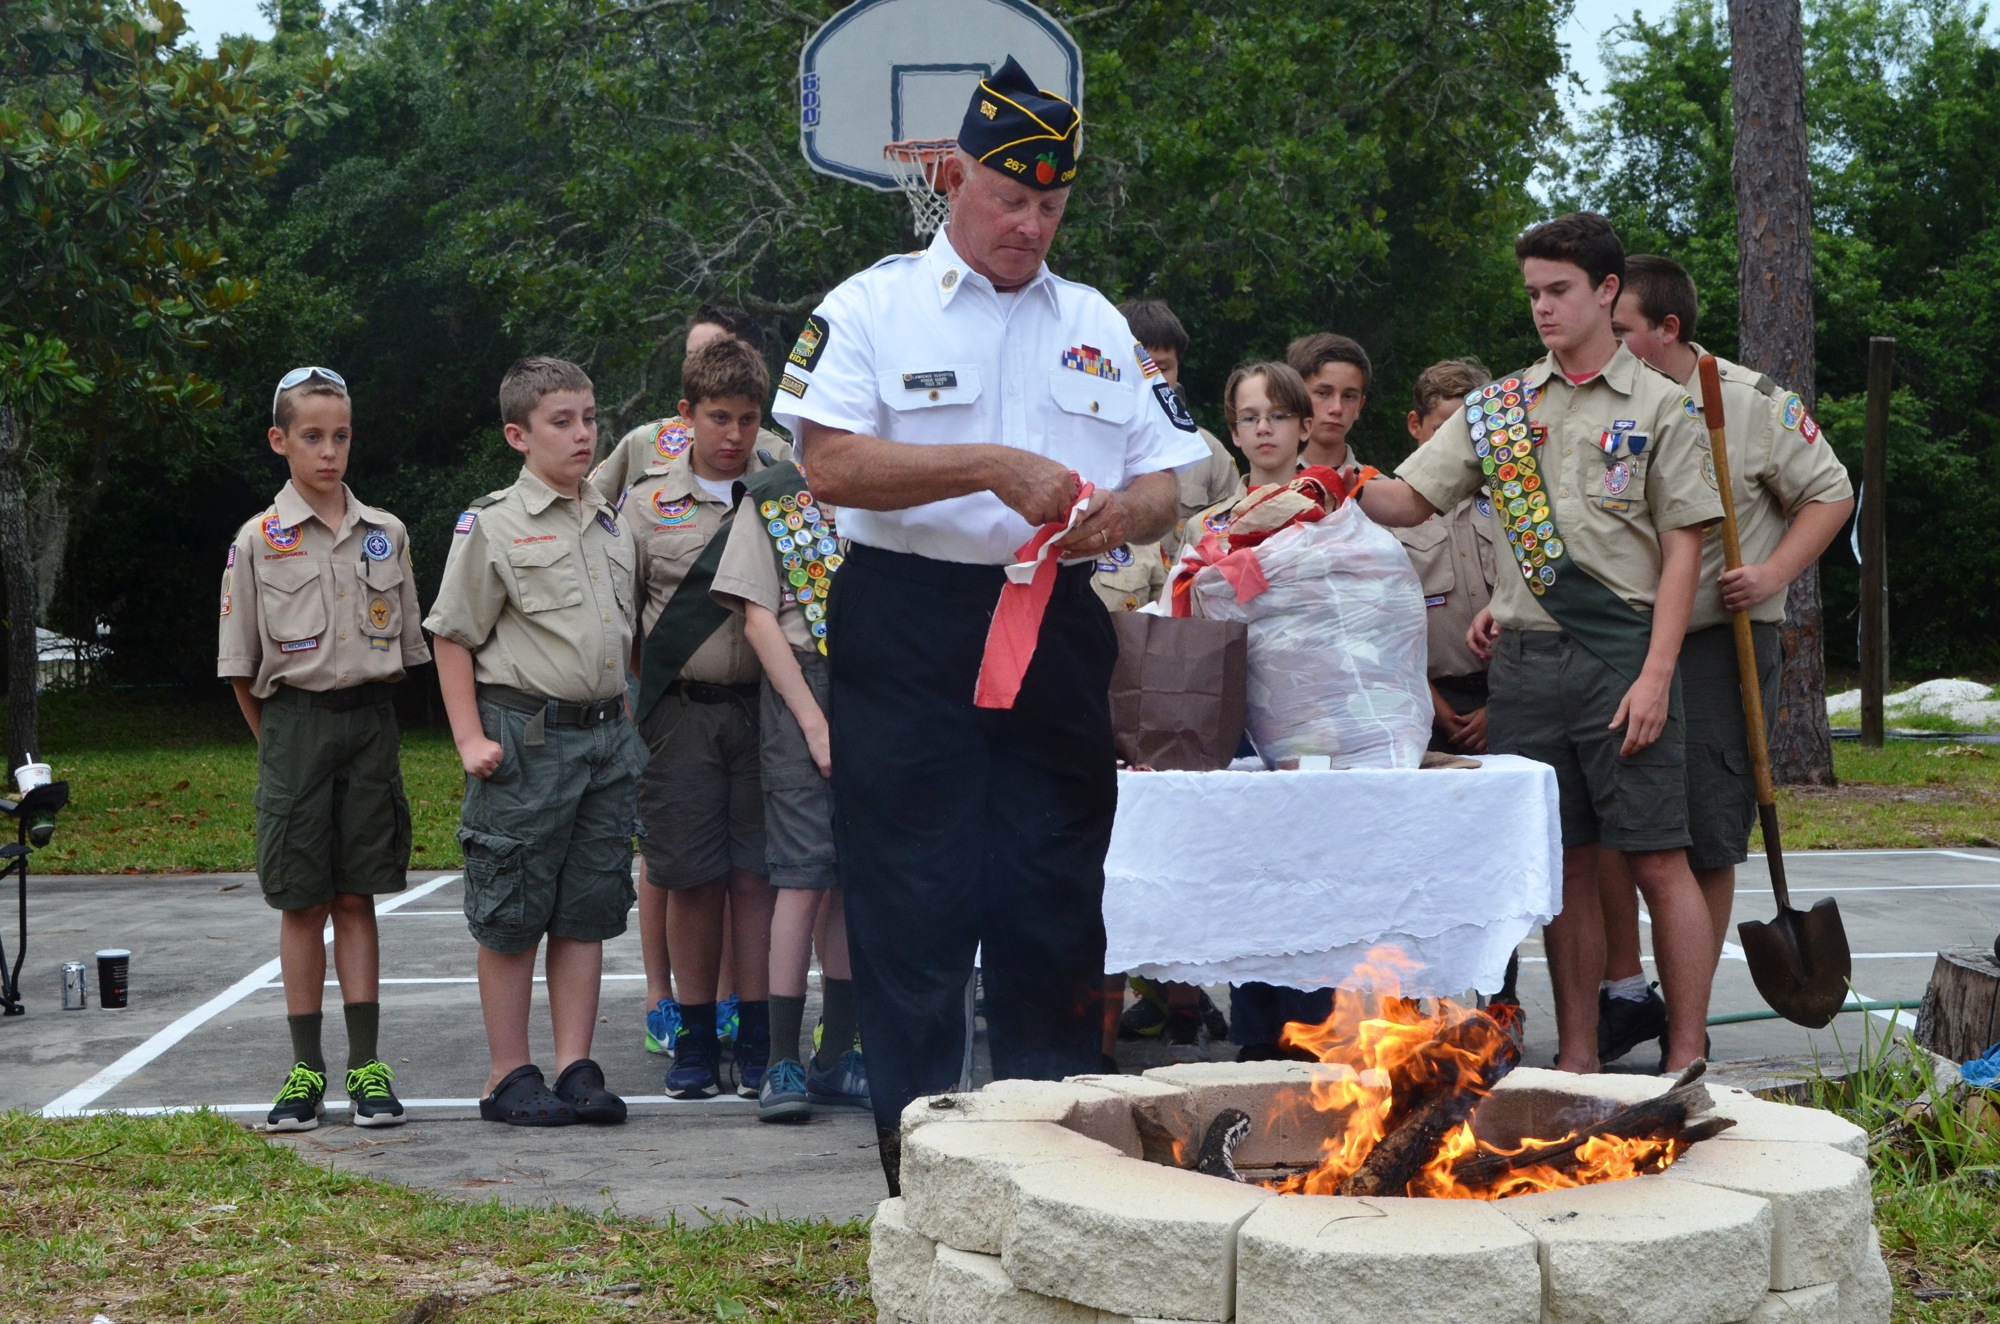 Lawrence Scovotto, honor guard commander, American Legion Post 267, prepares to place part of a flag on the fire.